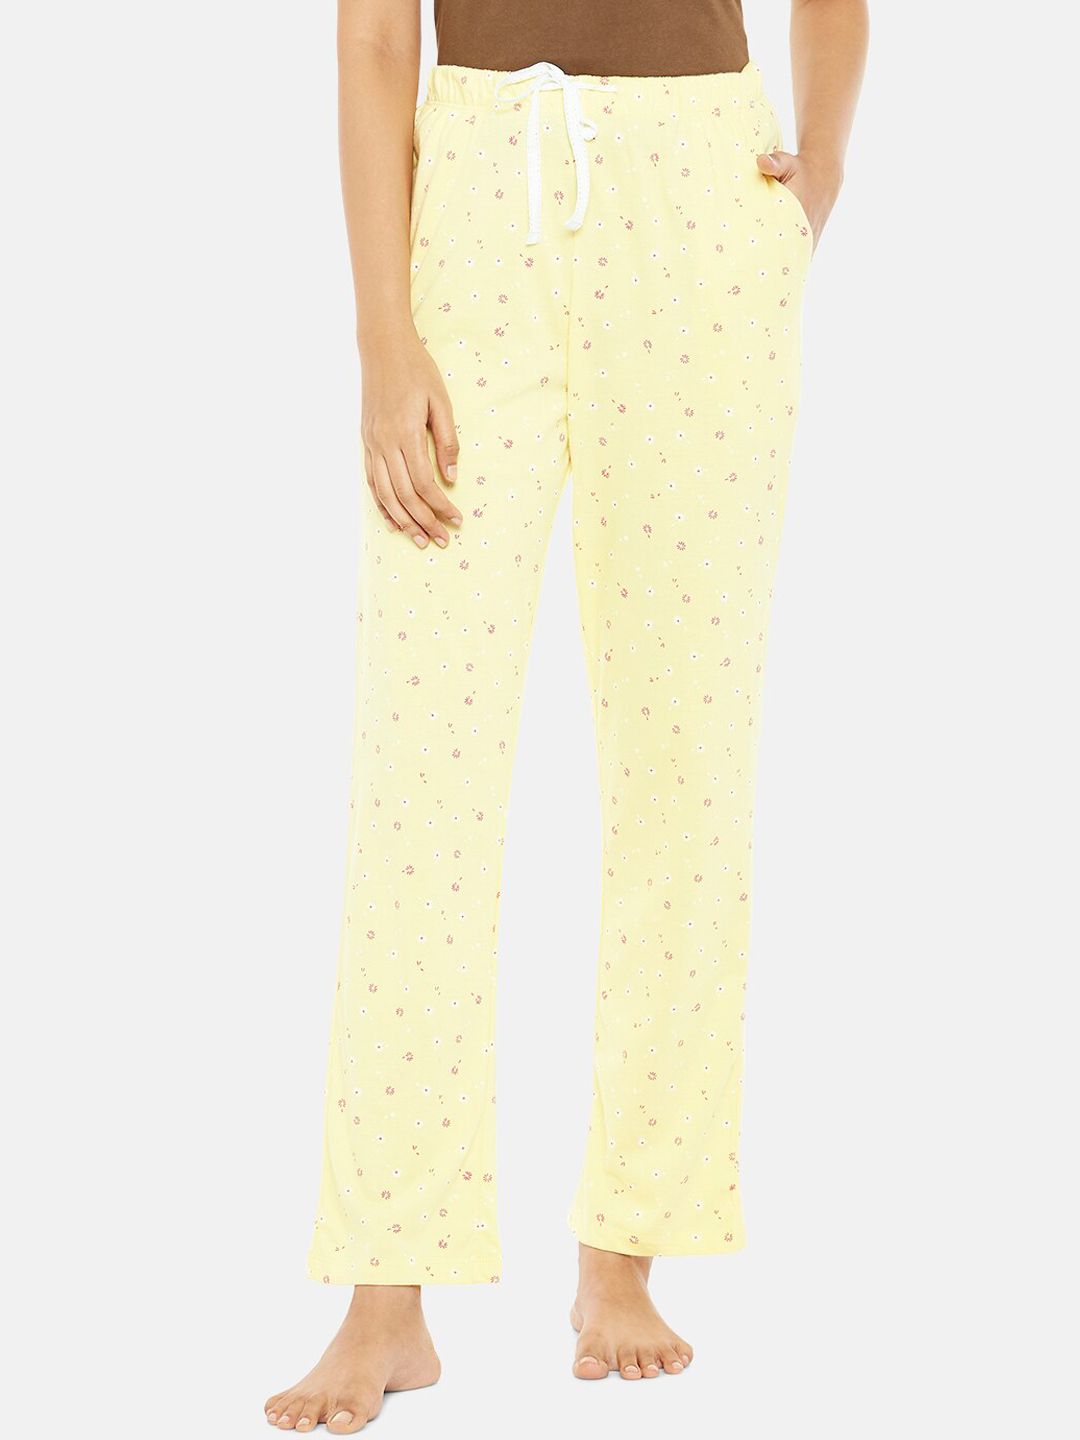 Dreamz by Pantaloons Women Yellow Printed Lounge Pants Price in India